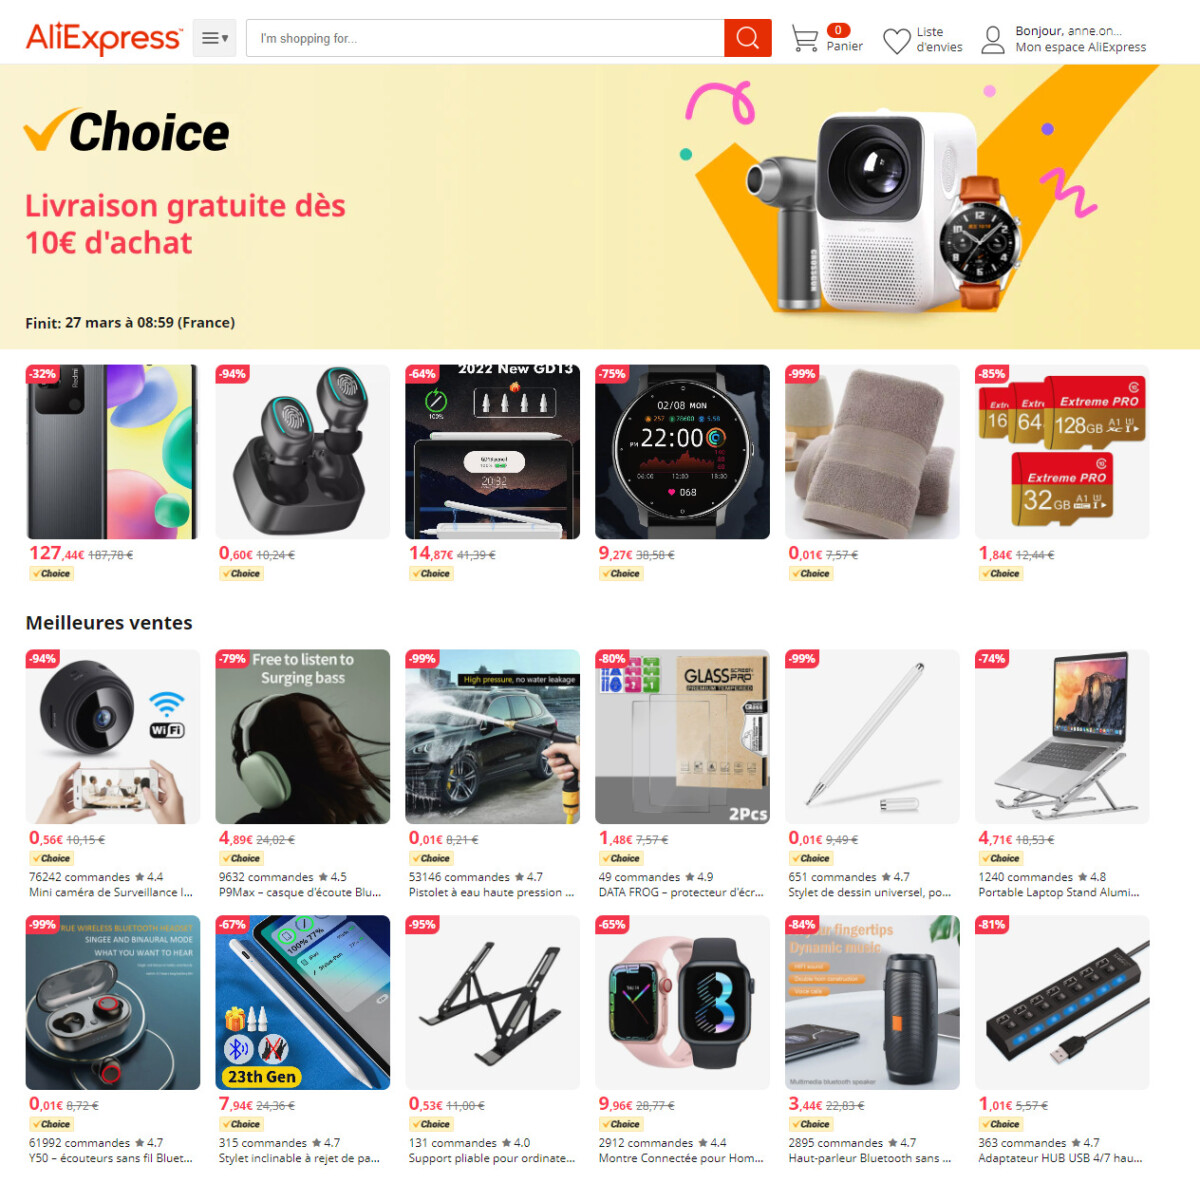 AliExpress birthday: here are 6 offers not to be missed